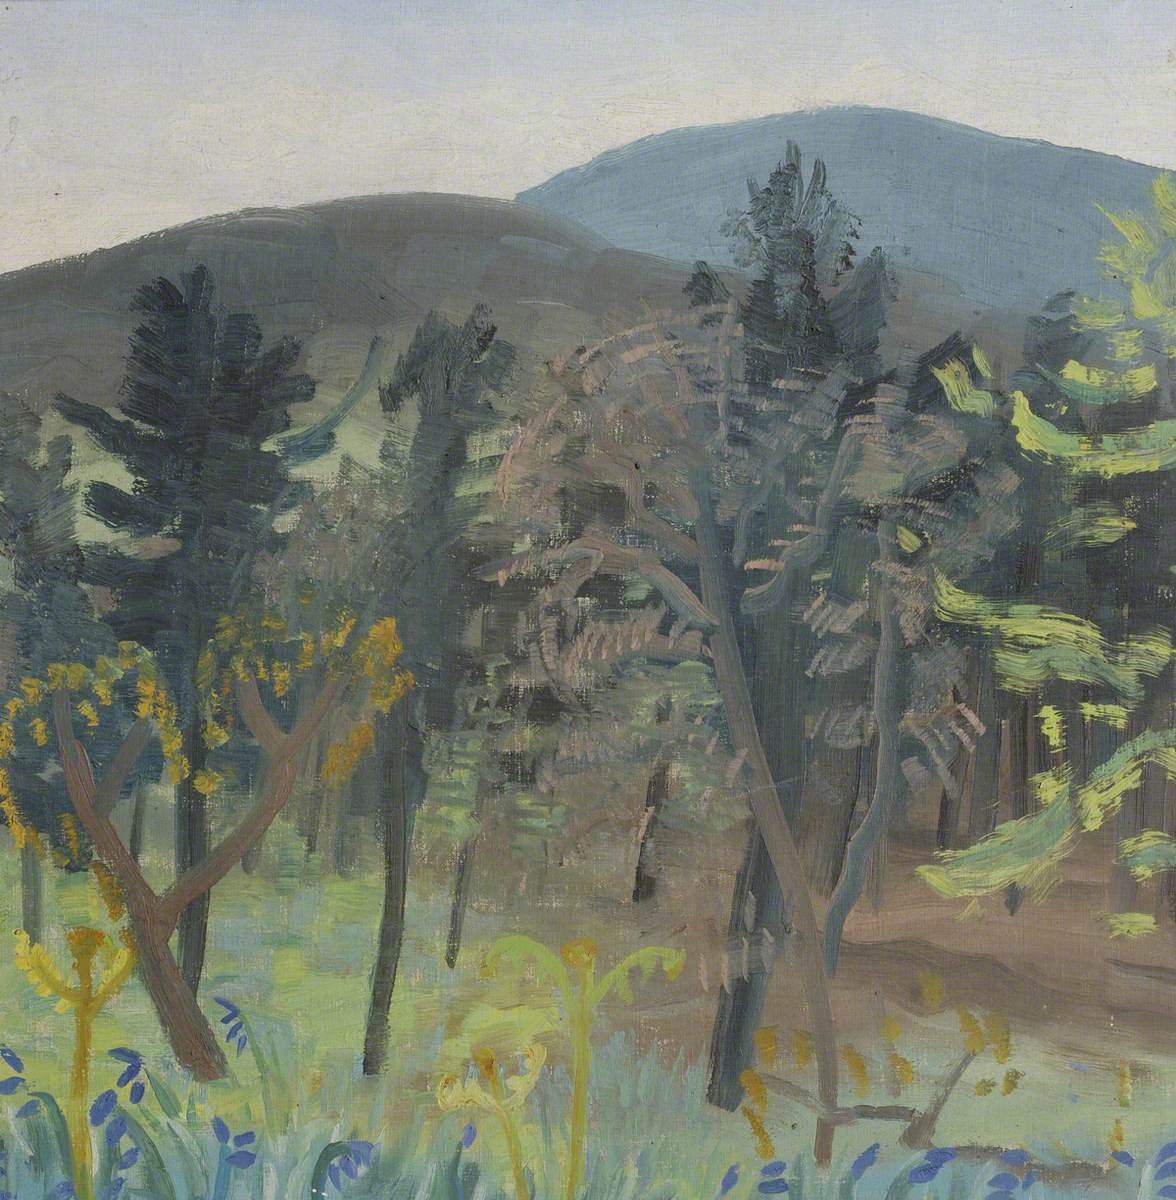 Trees and Bluebells in a Hilly Landscape*